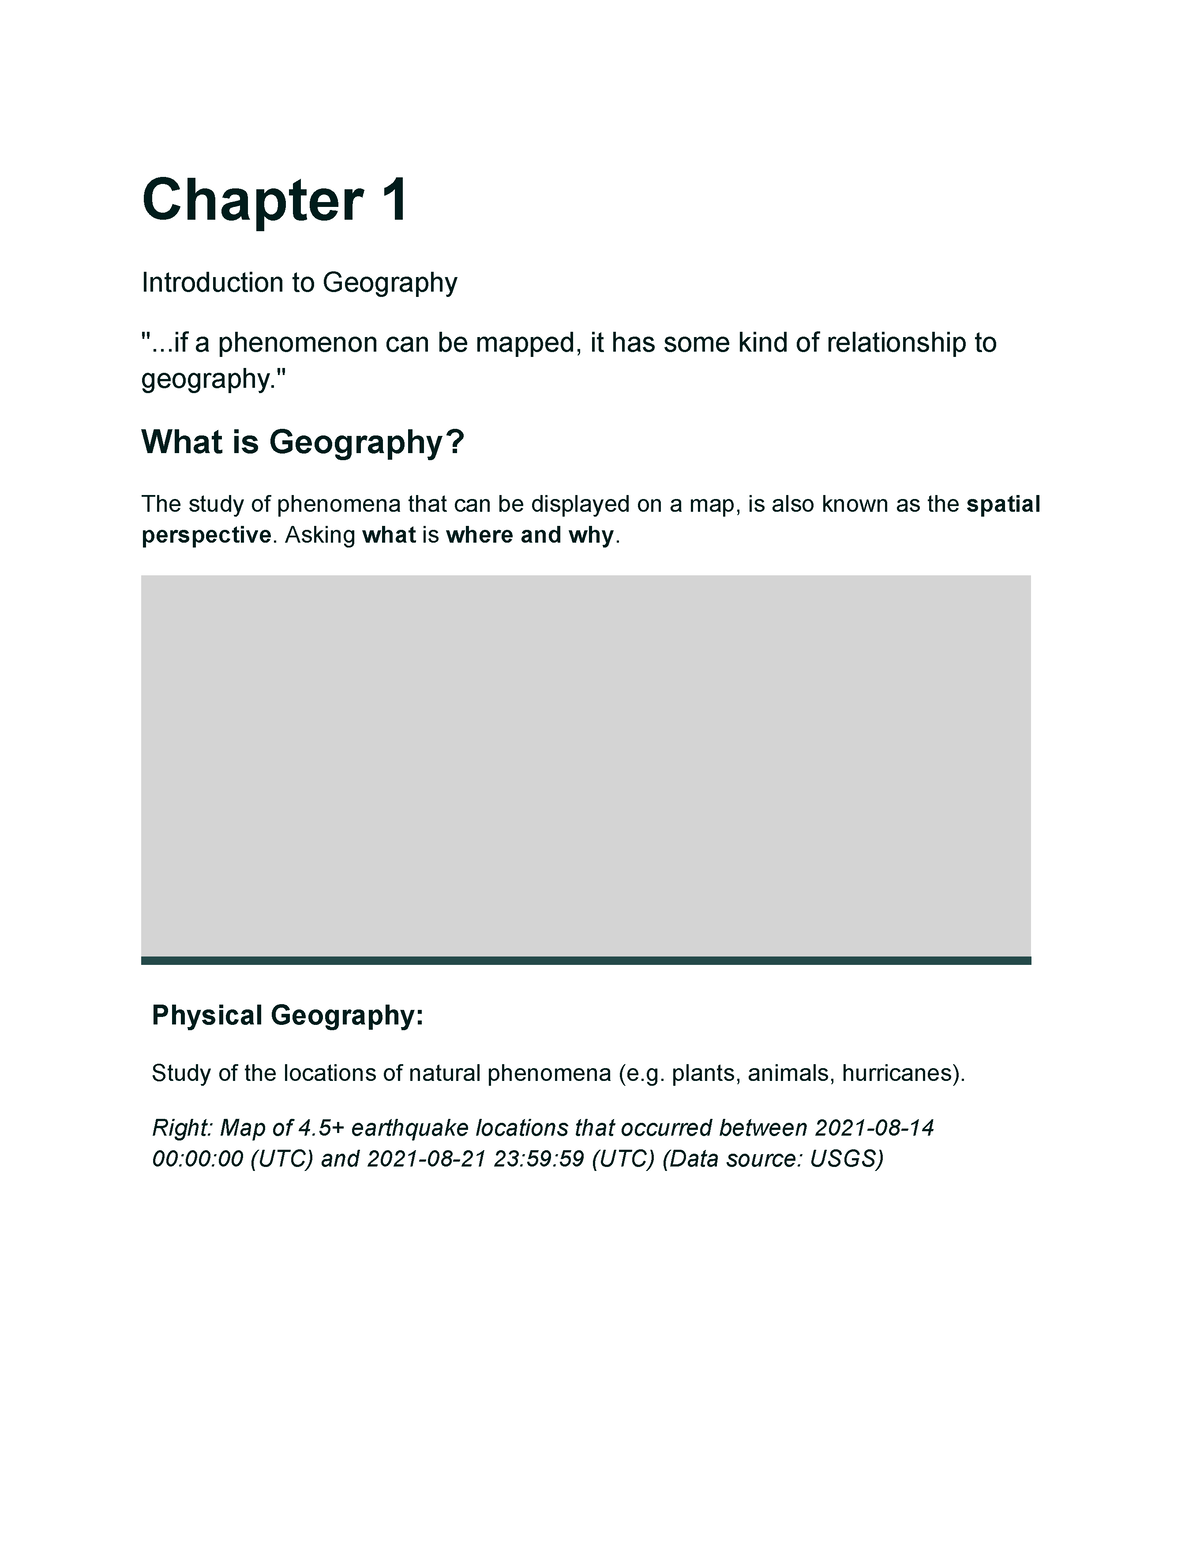 Chapter 1 World History Chapter 1 Introduction To Geography A Phenomenon Can Be Mapped 6118